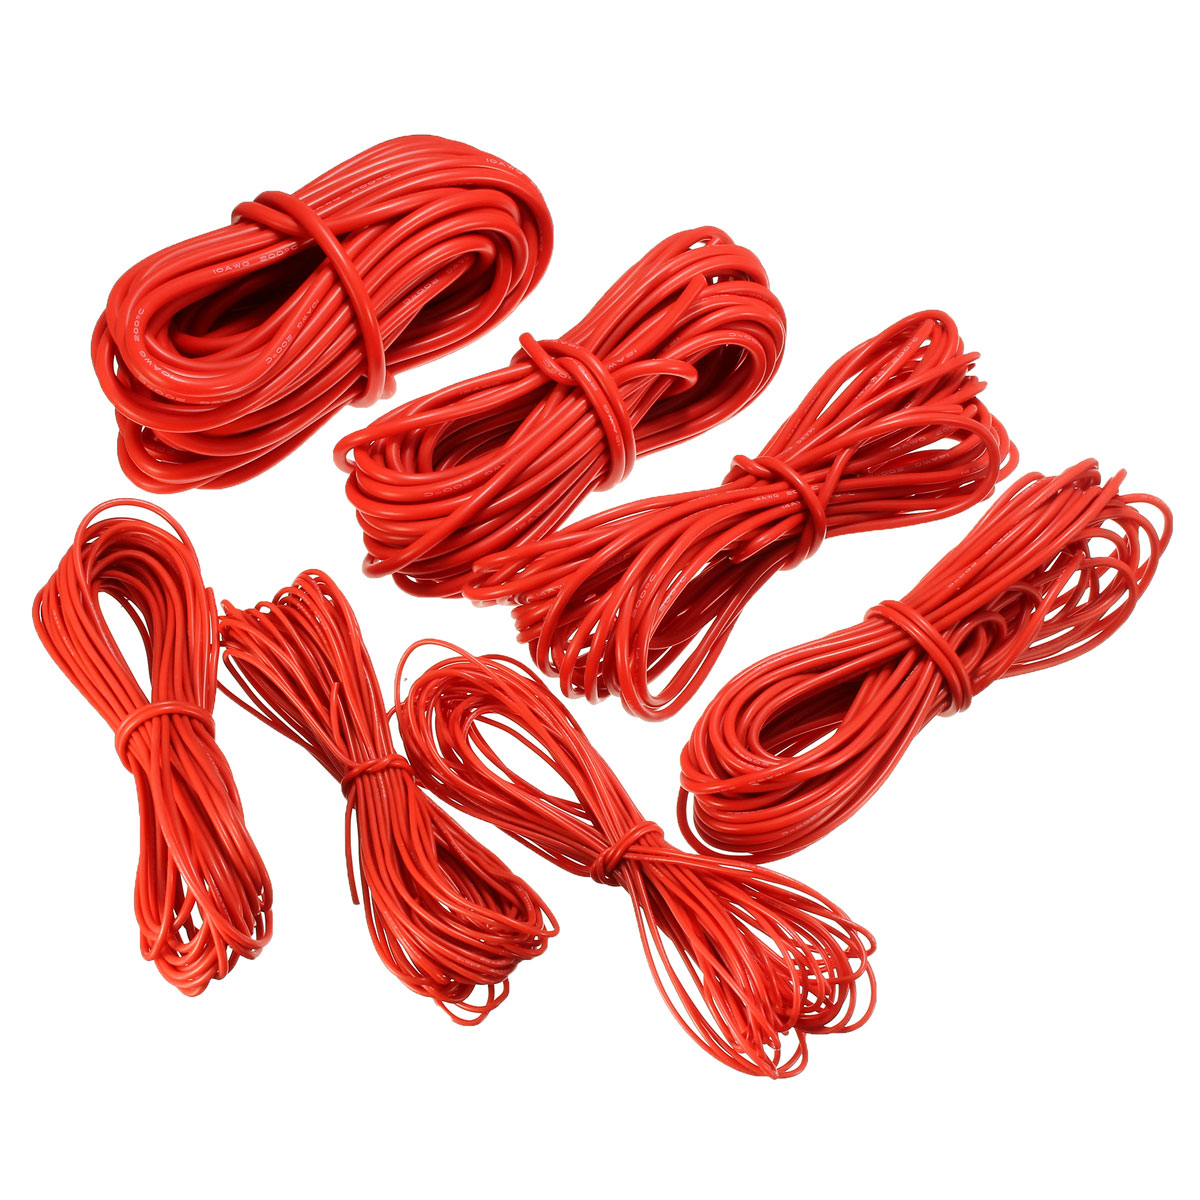 DANIU-10-Meter-Red-Silicone-Wire-Cable-10121416182022AWG-Flexible-Cable-1170297-2